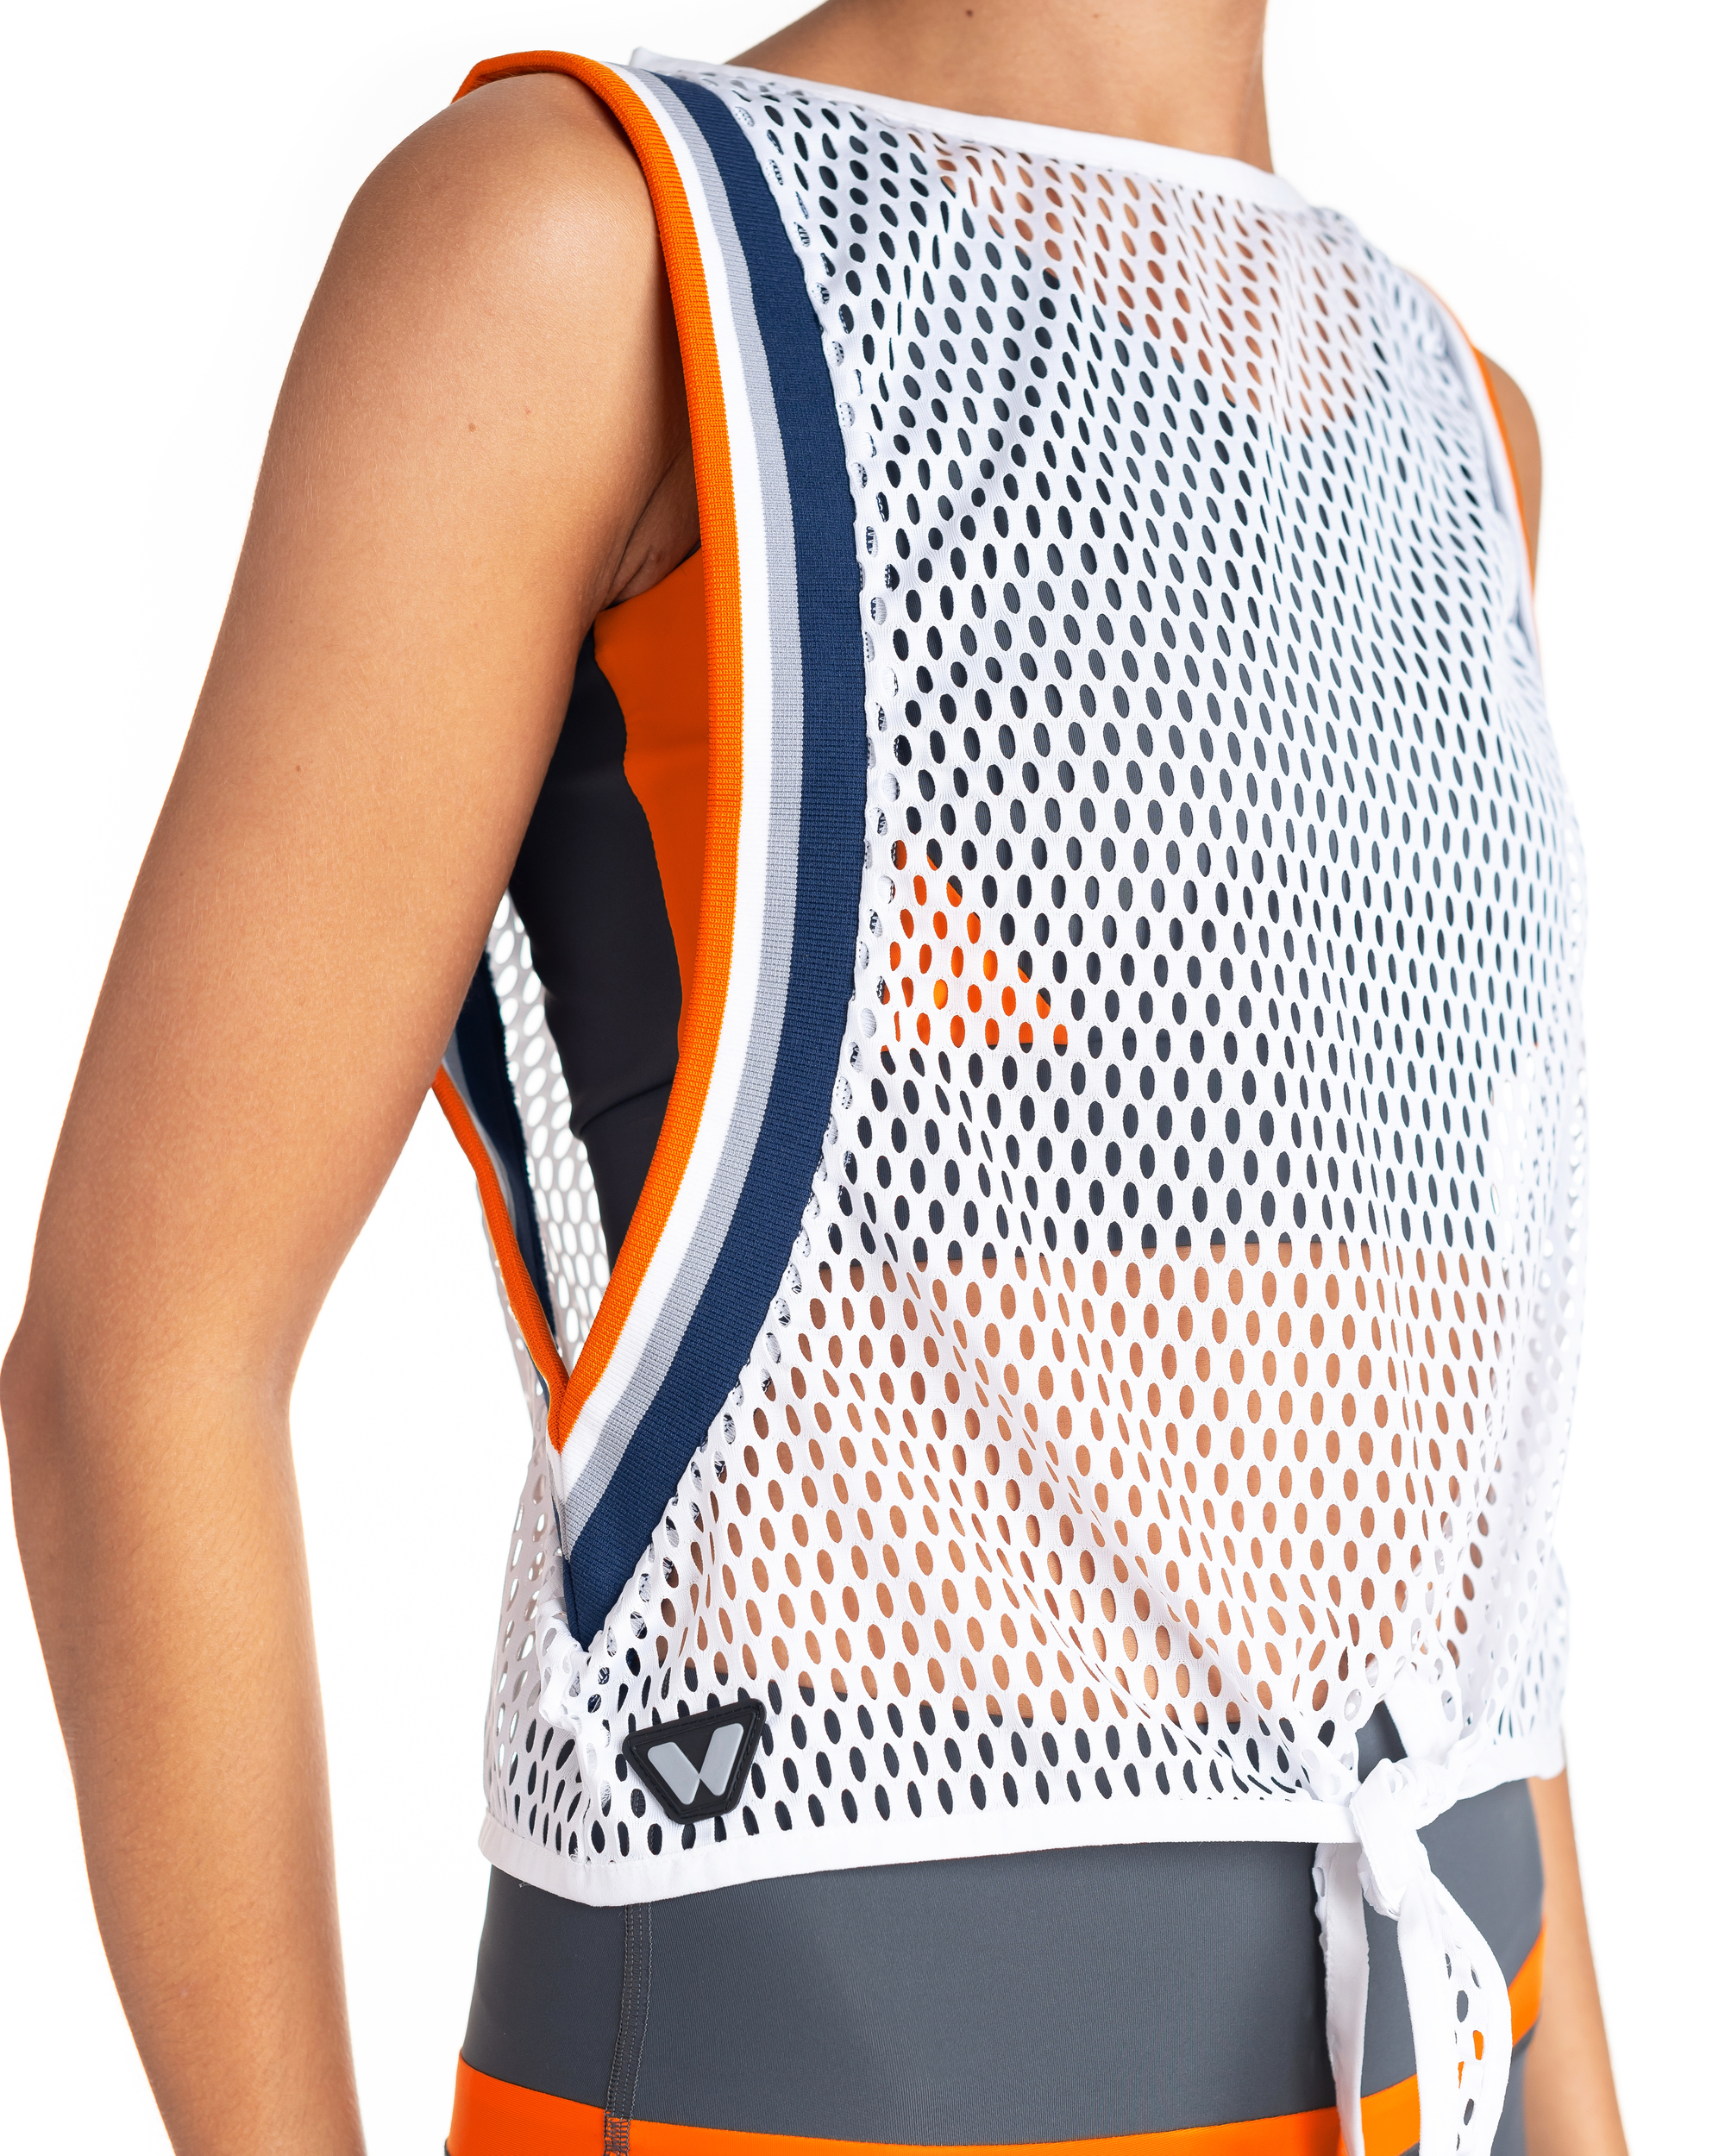 SPORT MESH TOP WHITE Sport tank top, perfect to complete your